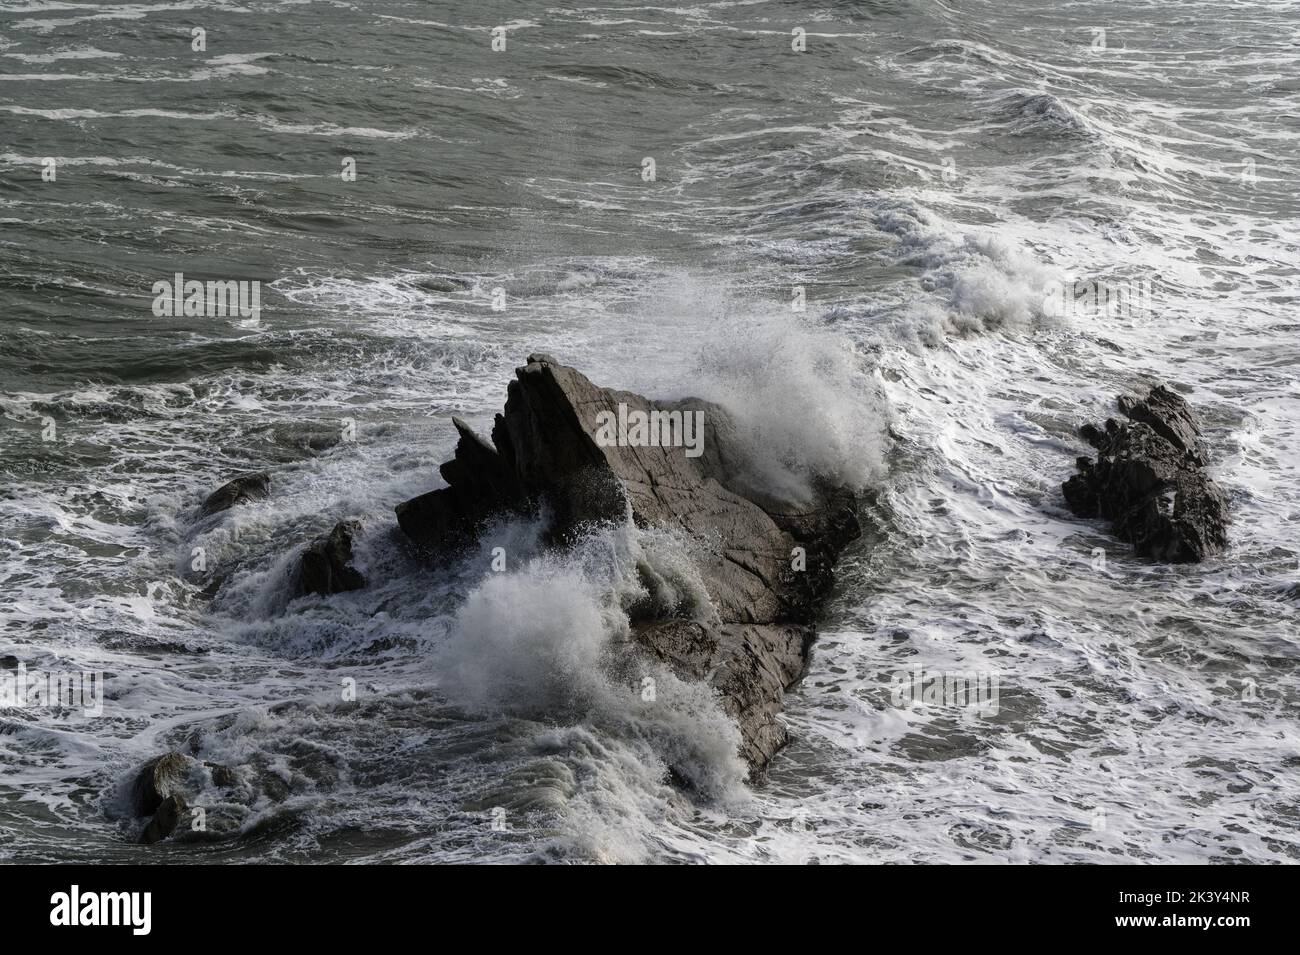 The sea churns around rocks in the ocean as waves surge forward. Stock Photo